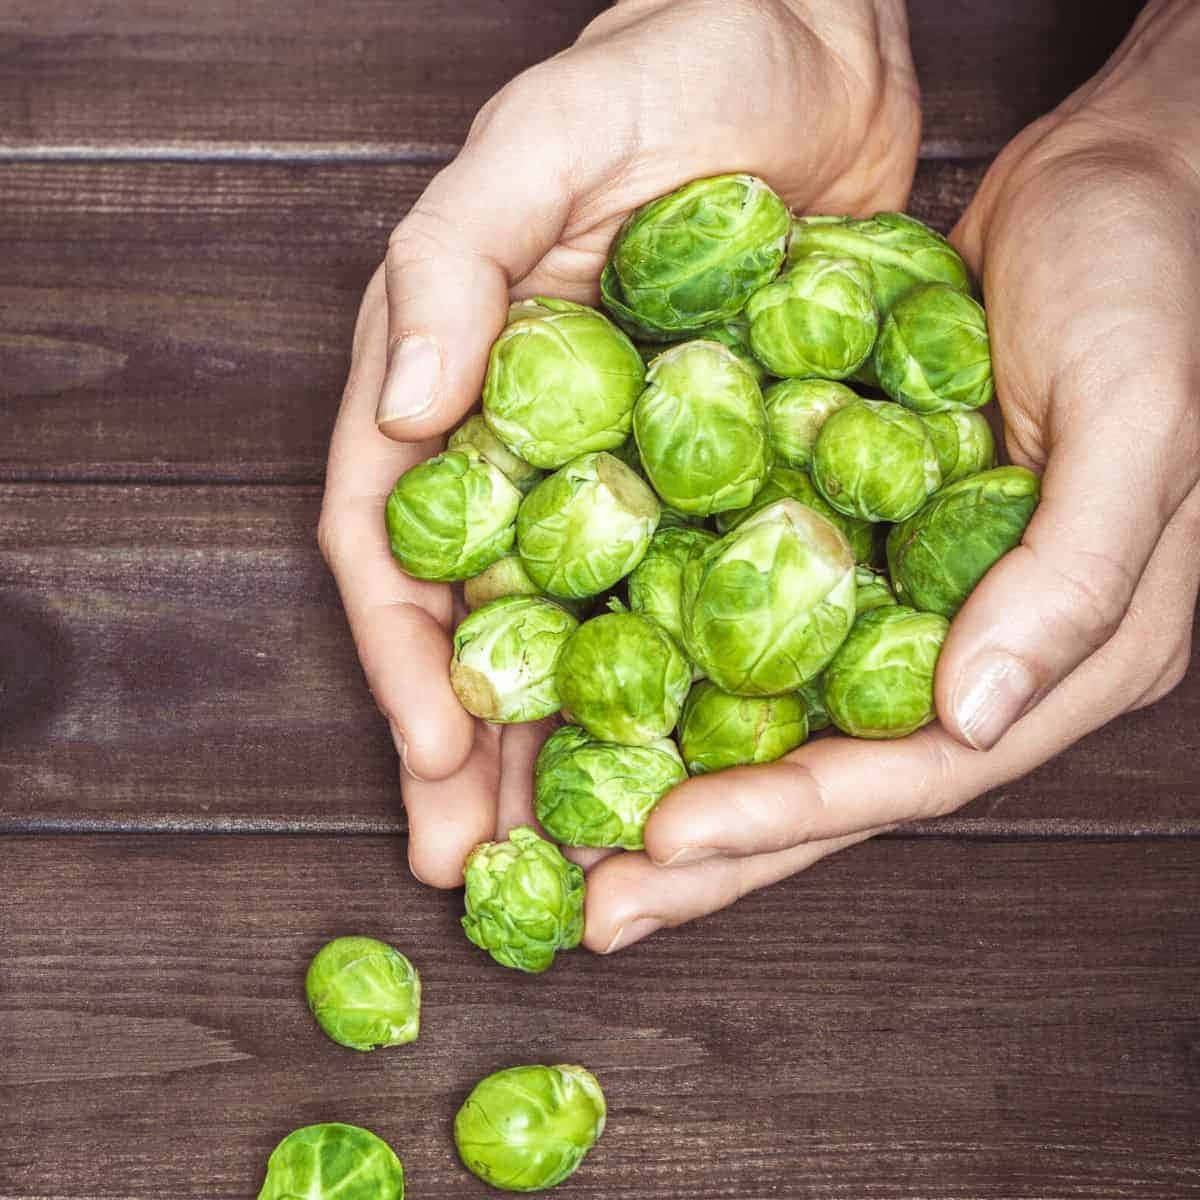 Brussel Sprouts In The Hands Of A Person